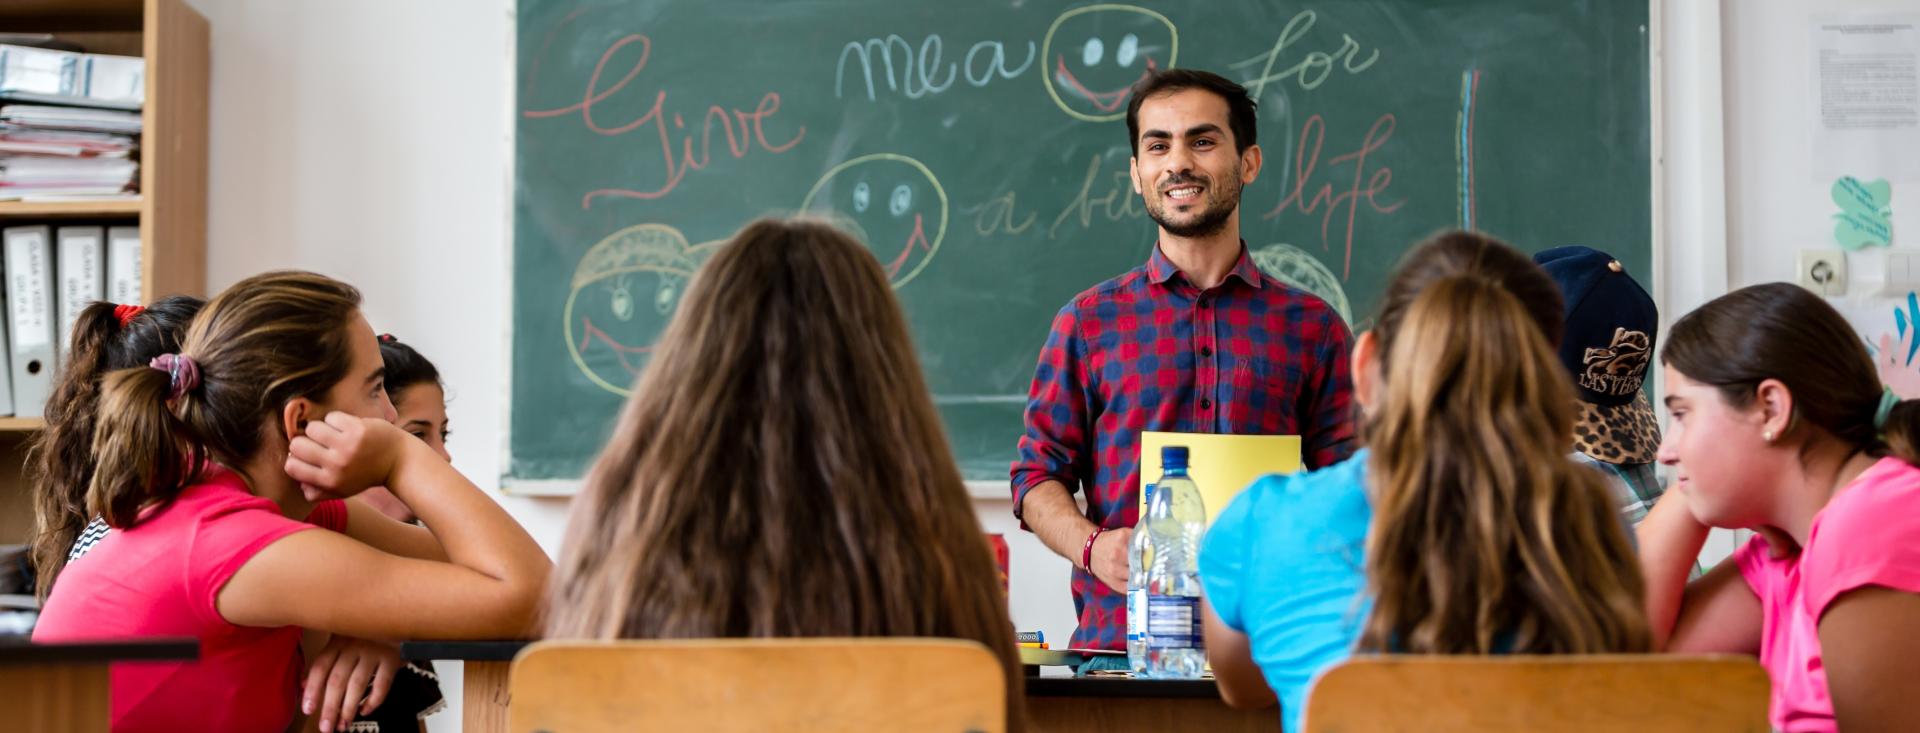 A teacher is smiling and standing in front of his students in a classroom holding a paper. There is a chalkboard behind him with writing and drawn smiley faces.